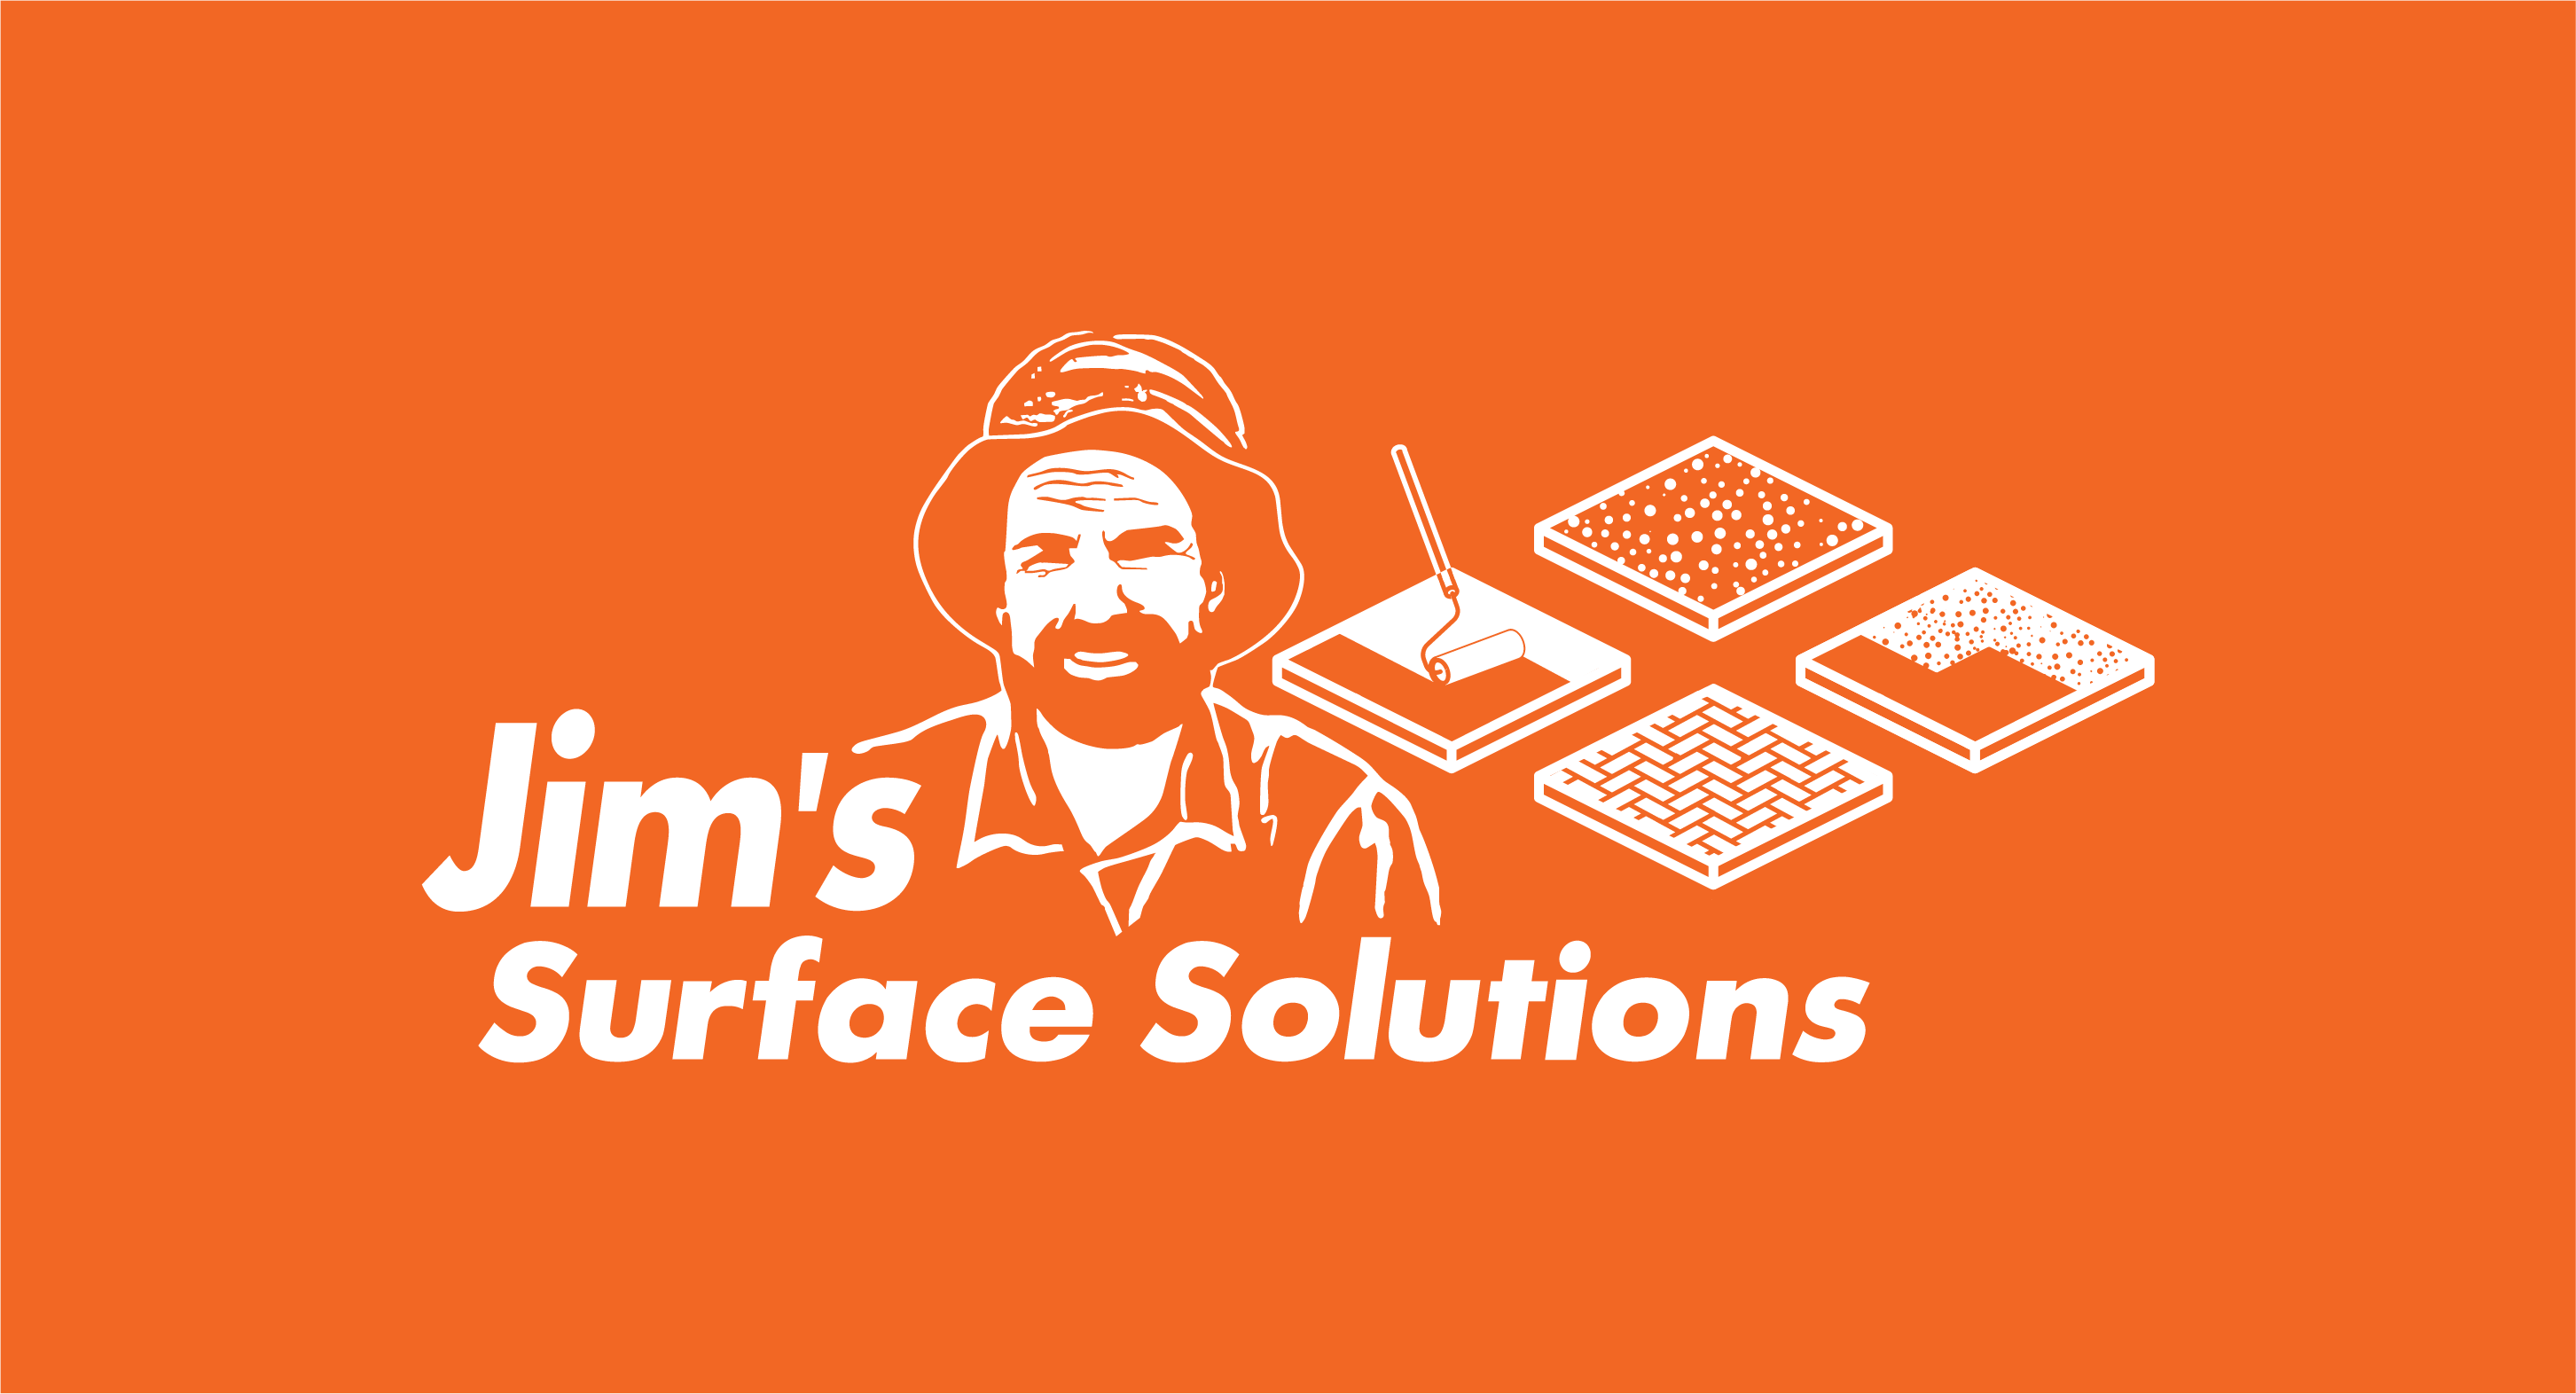 New Services for Jim’s Surface Solutions